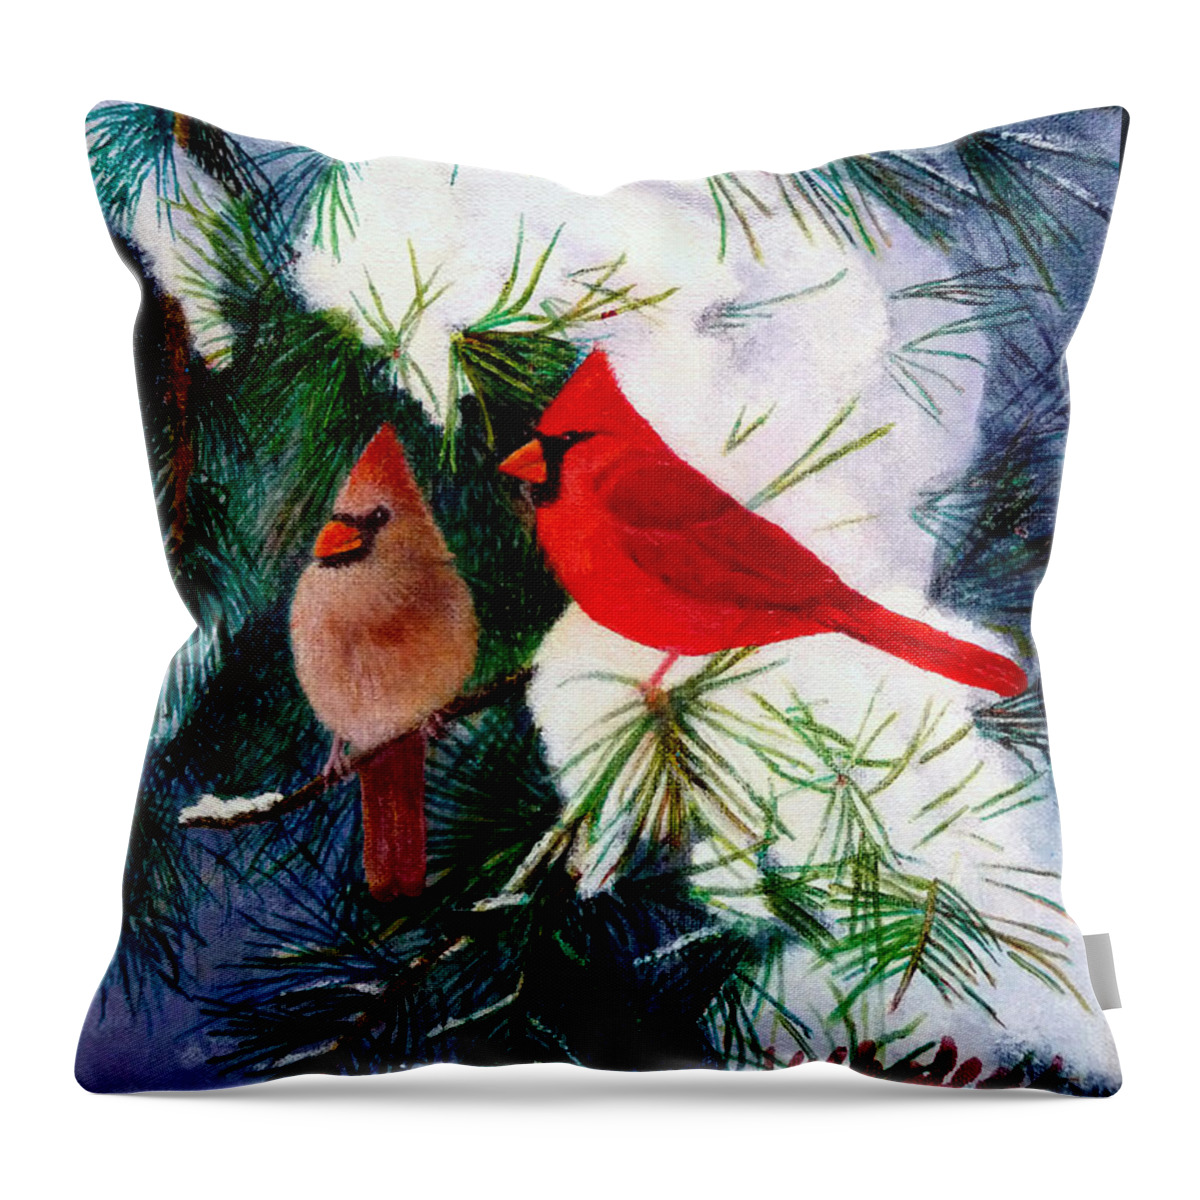 Cardinals Throw Pillow featuring the painting Greeting Cardinals by Jim Whalen